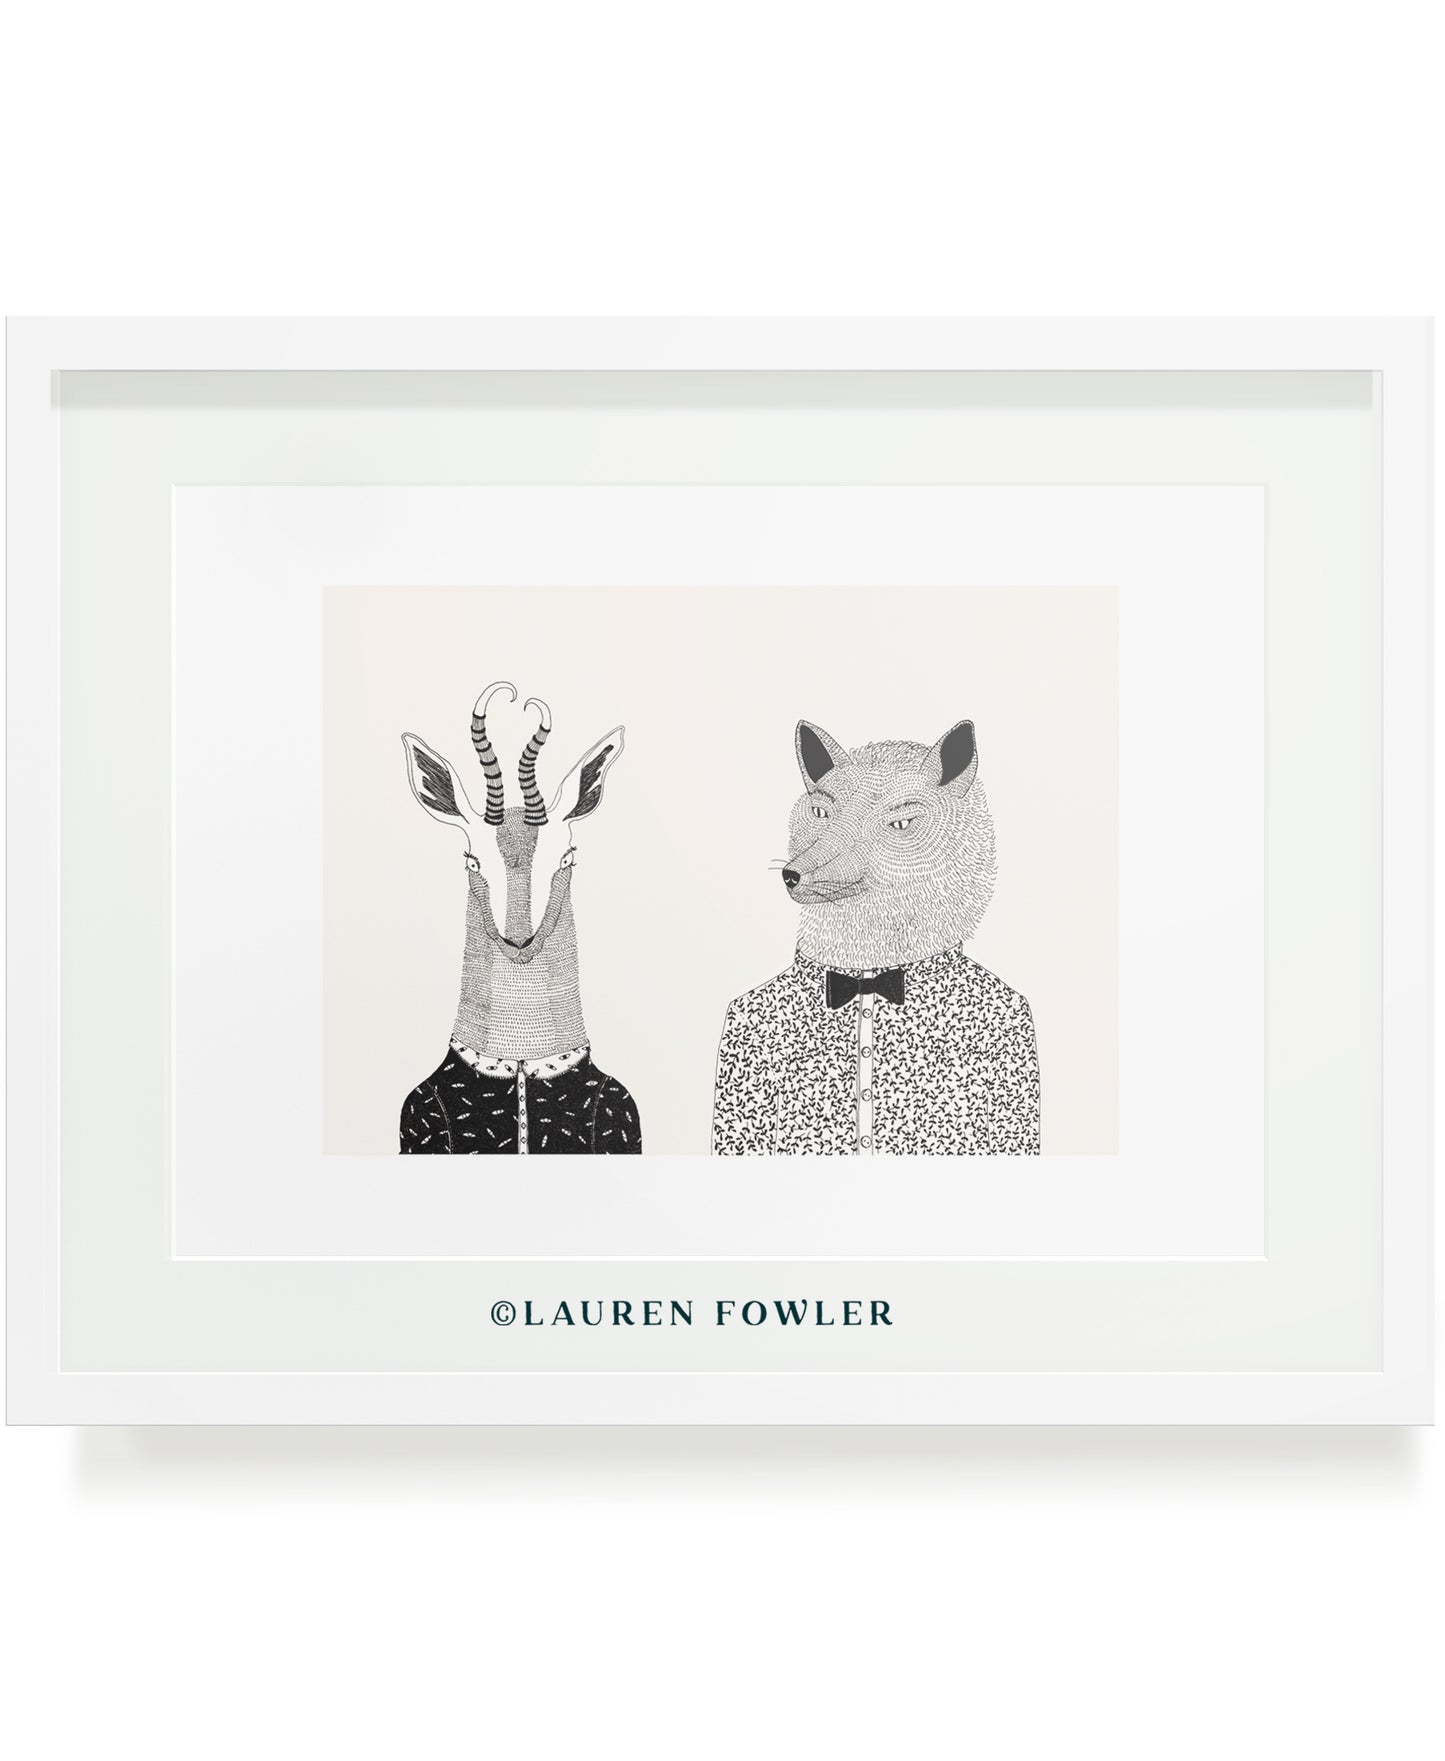 Bokkie and Wolf people as animals illustrated artwork by Lauren Fowler